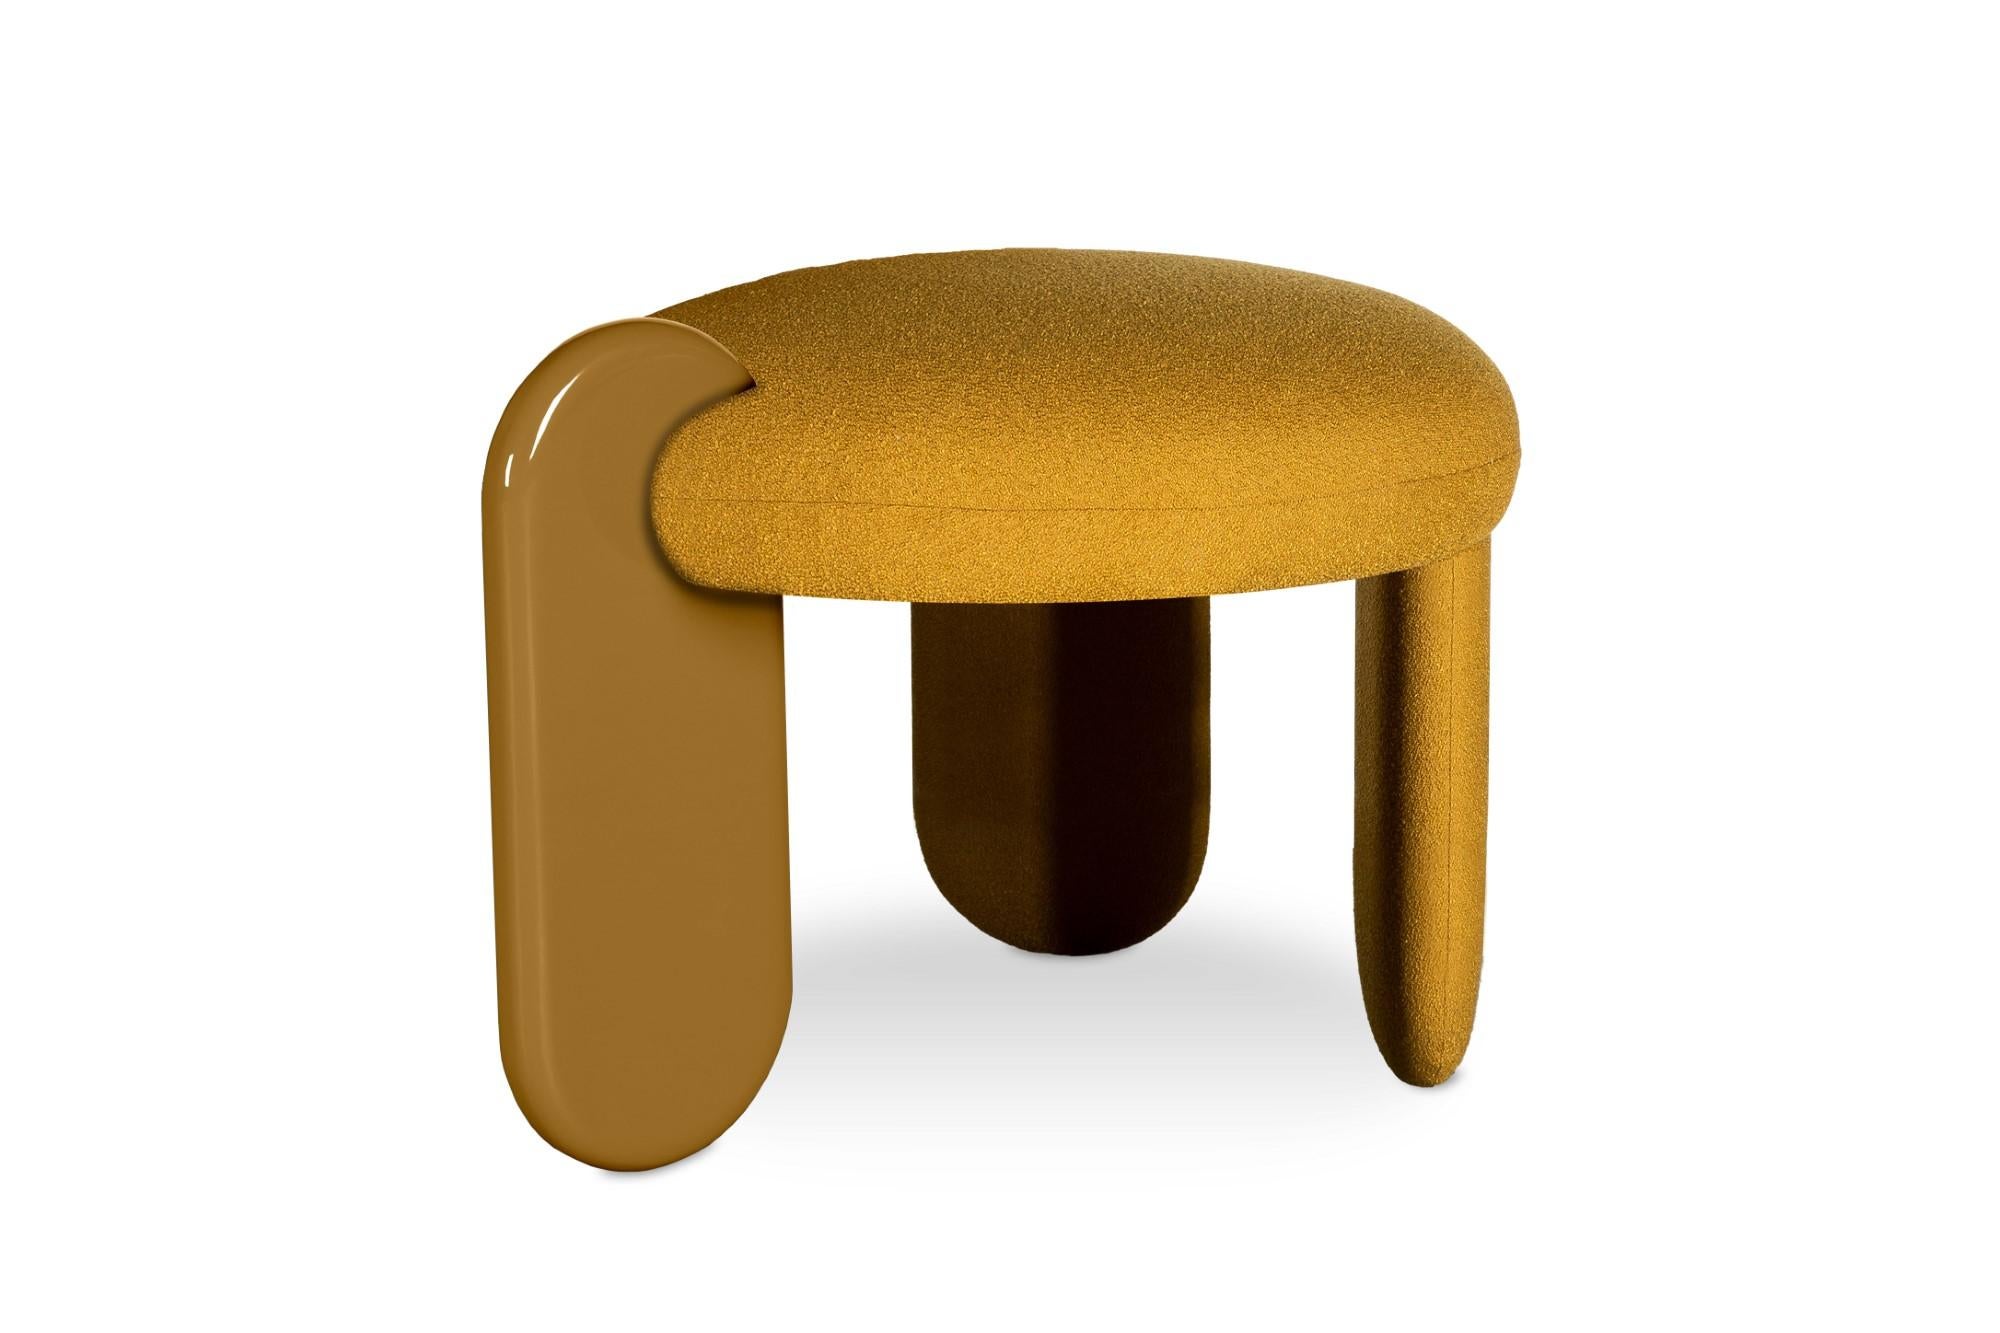 Glazy stool by Royal Stranger
Dimensions: Width 68.5cm, height 50cm, depth 60cm
Materials: Solid wood frame, foam, upholstery.
Moutarde color from the Fabrics Main Collection LAGO.
Also available in other leg colors, Royal Stranger’s fabrics and